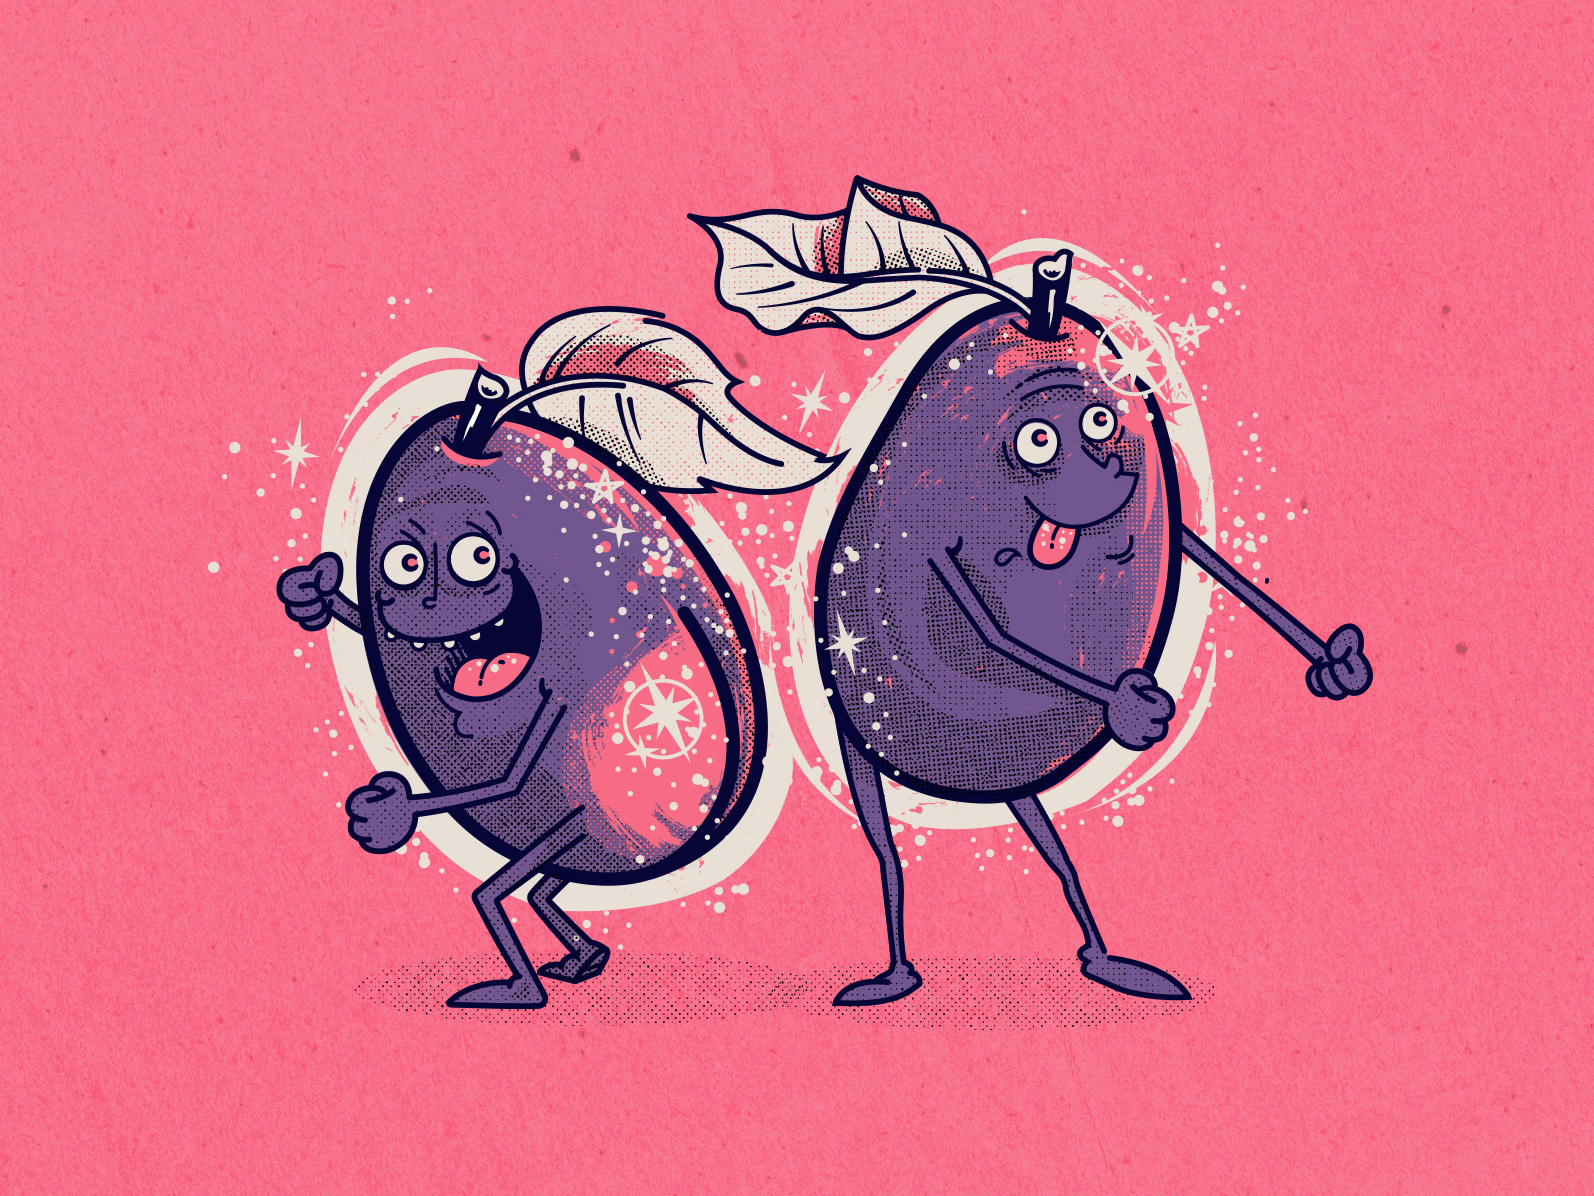 Sugar Plums by Derric Wise on Dribbble